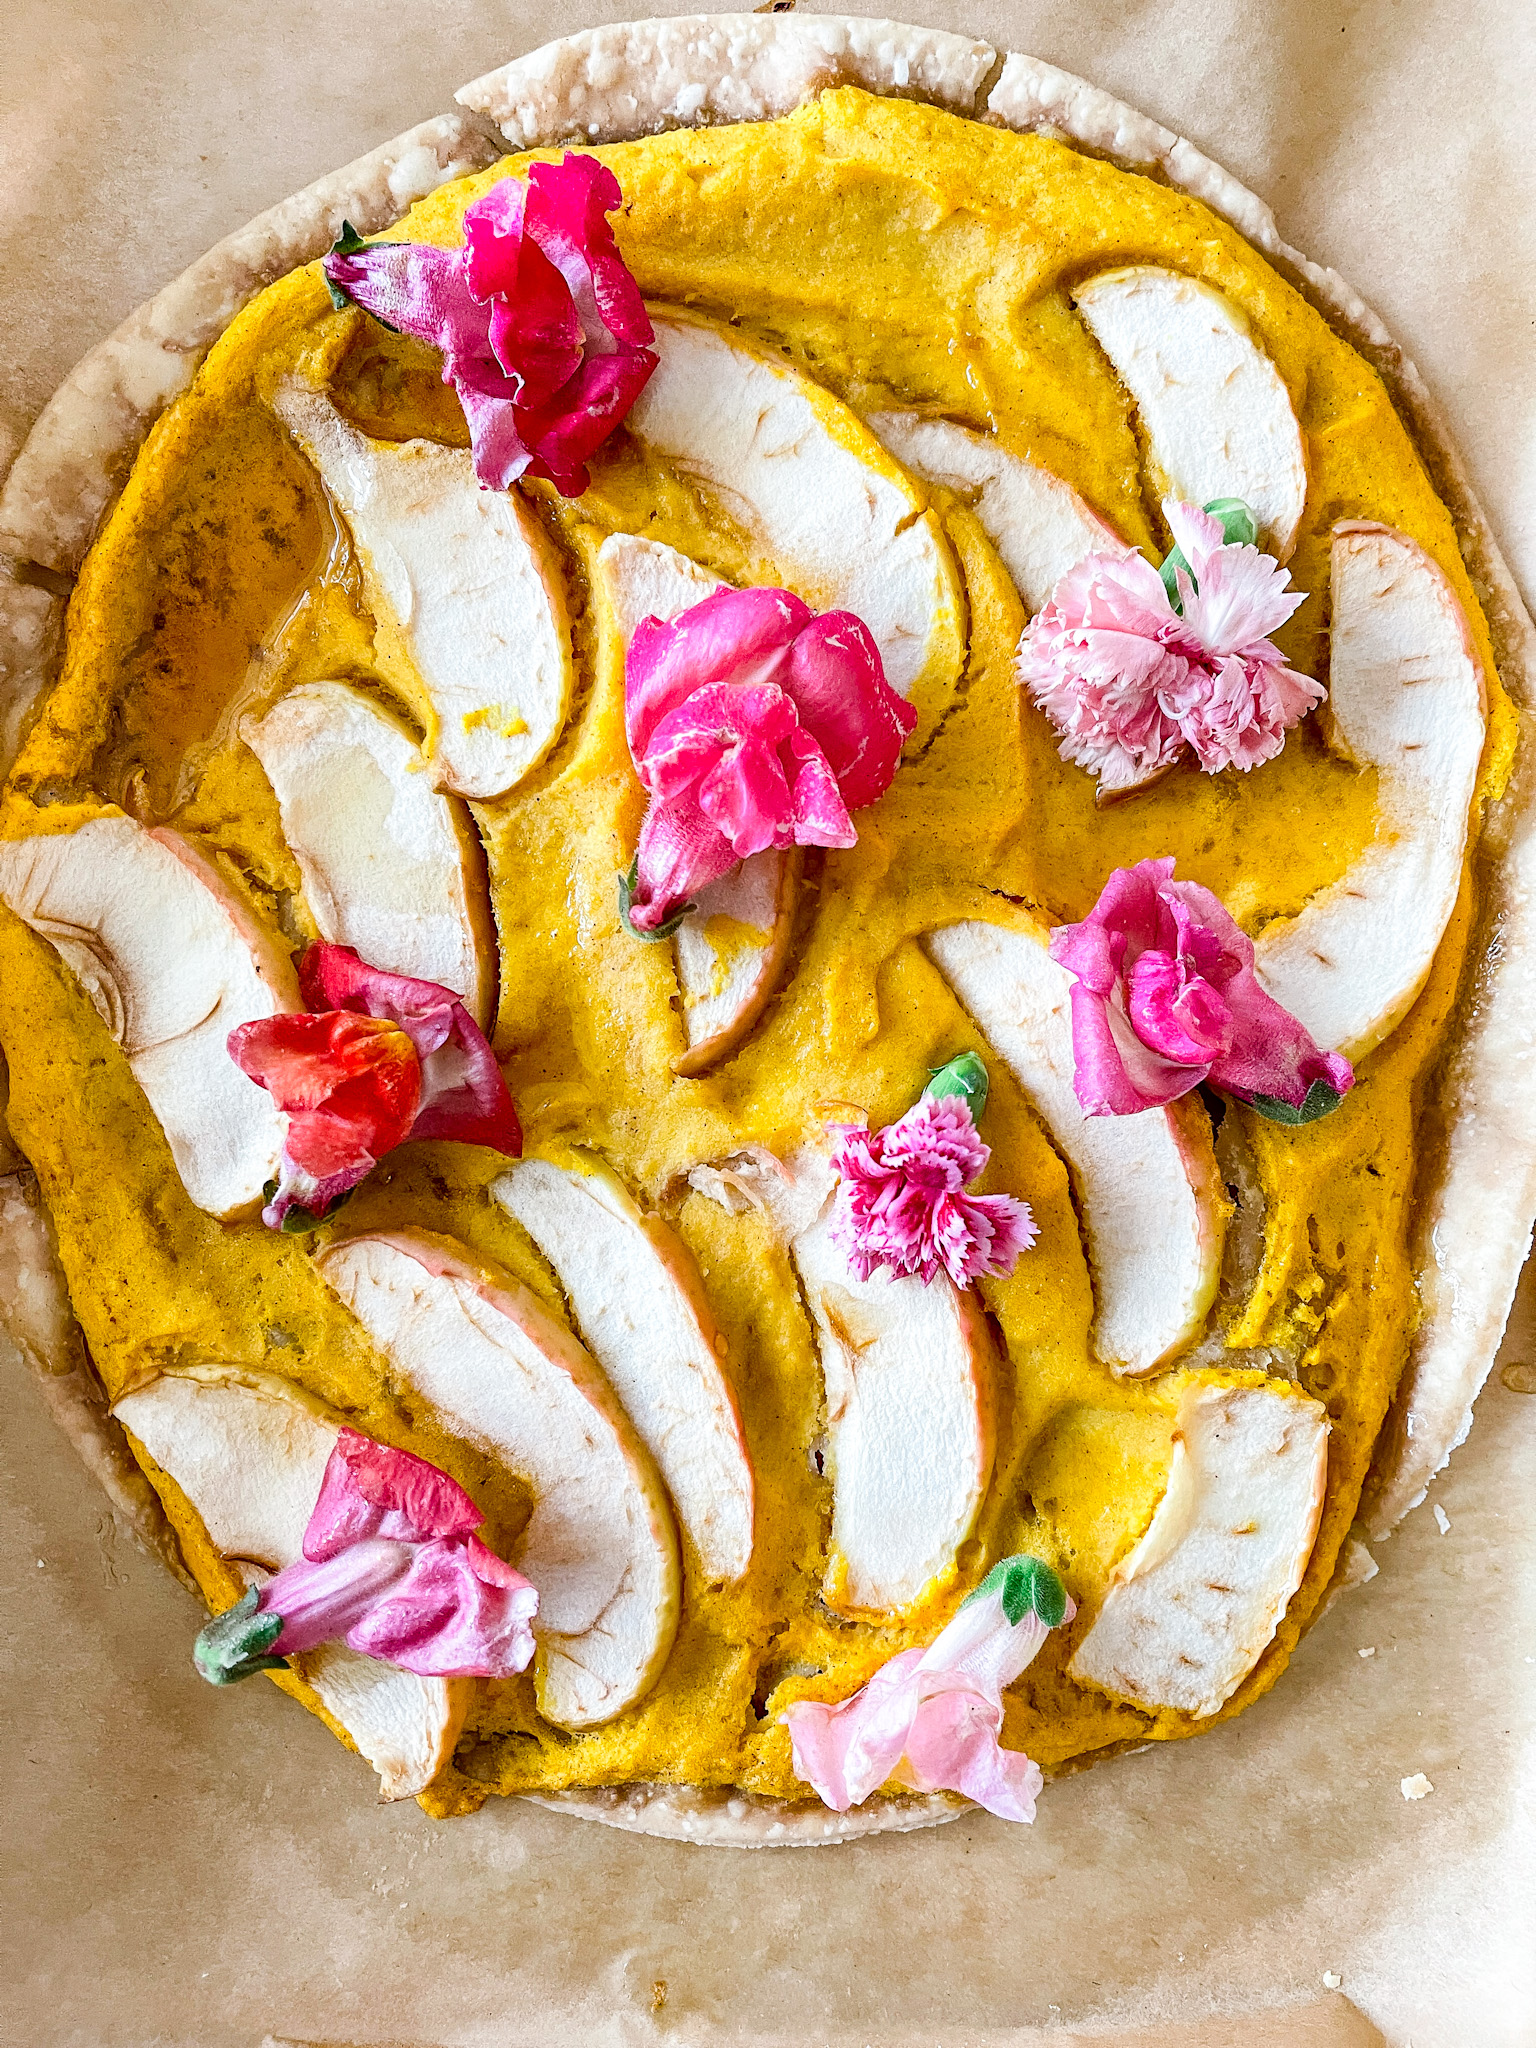 Overhead view of sweet butternut squash flatbread with apples and edible flowers.